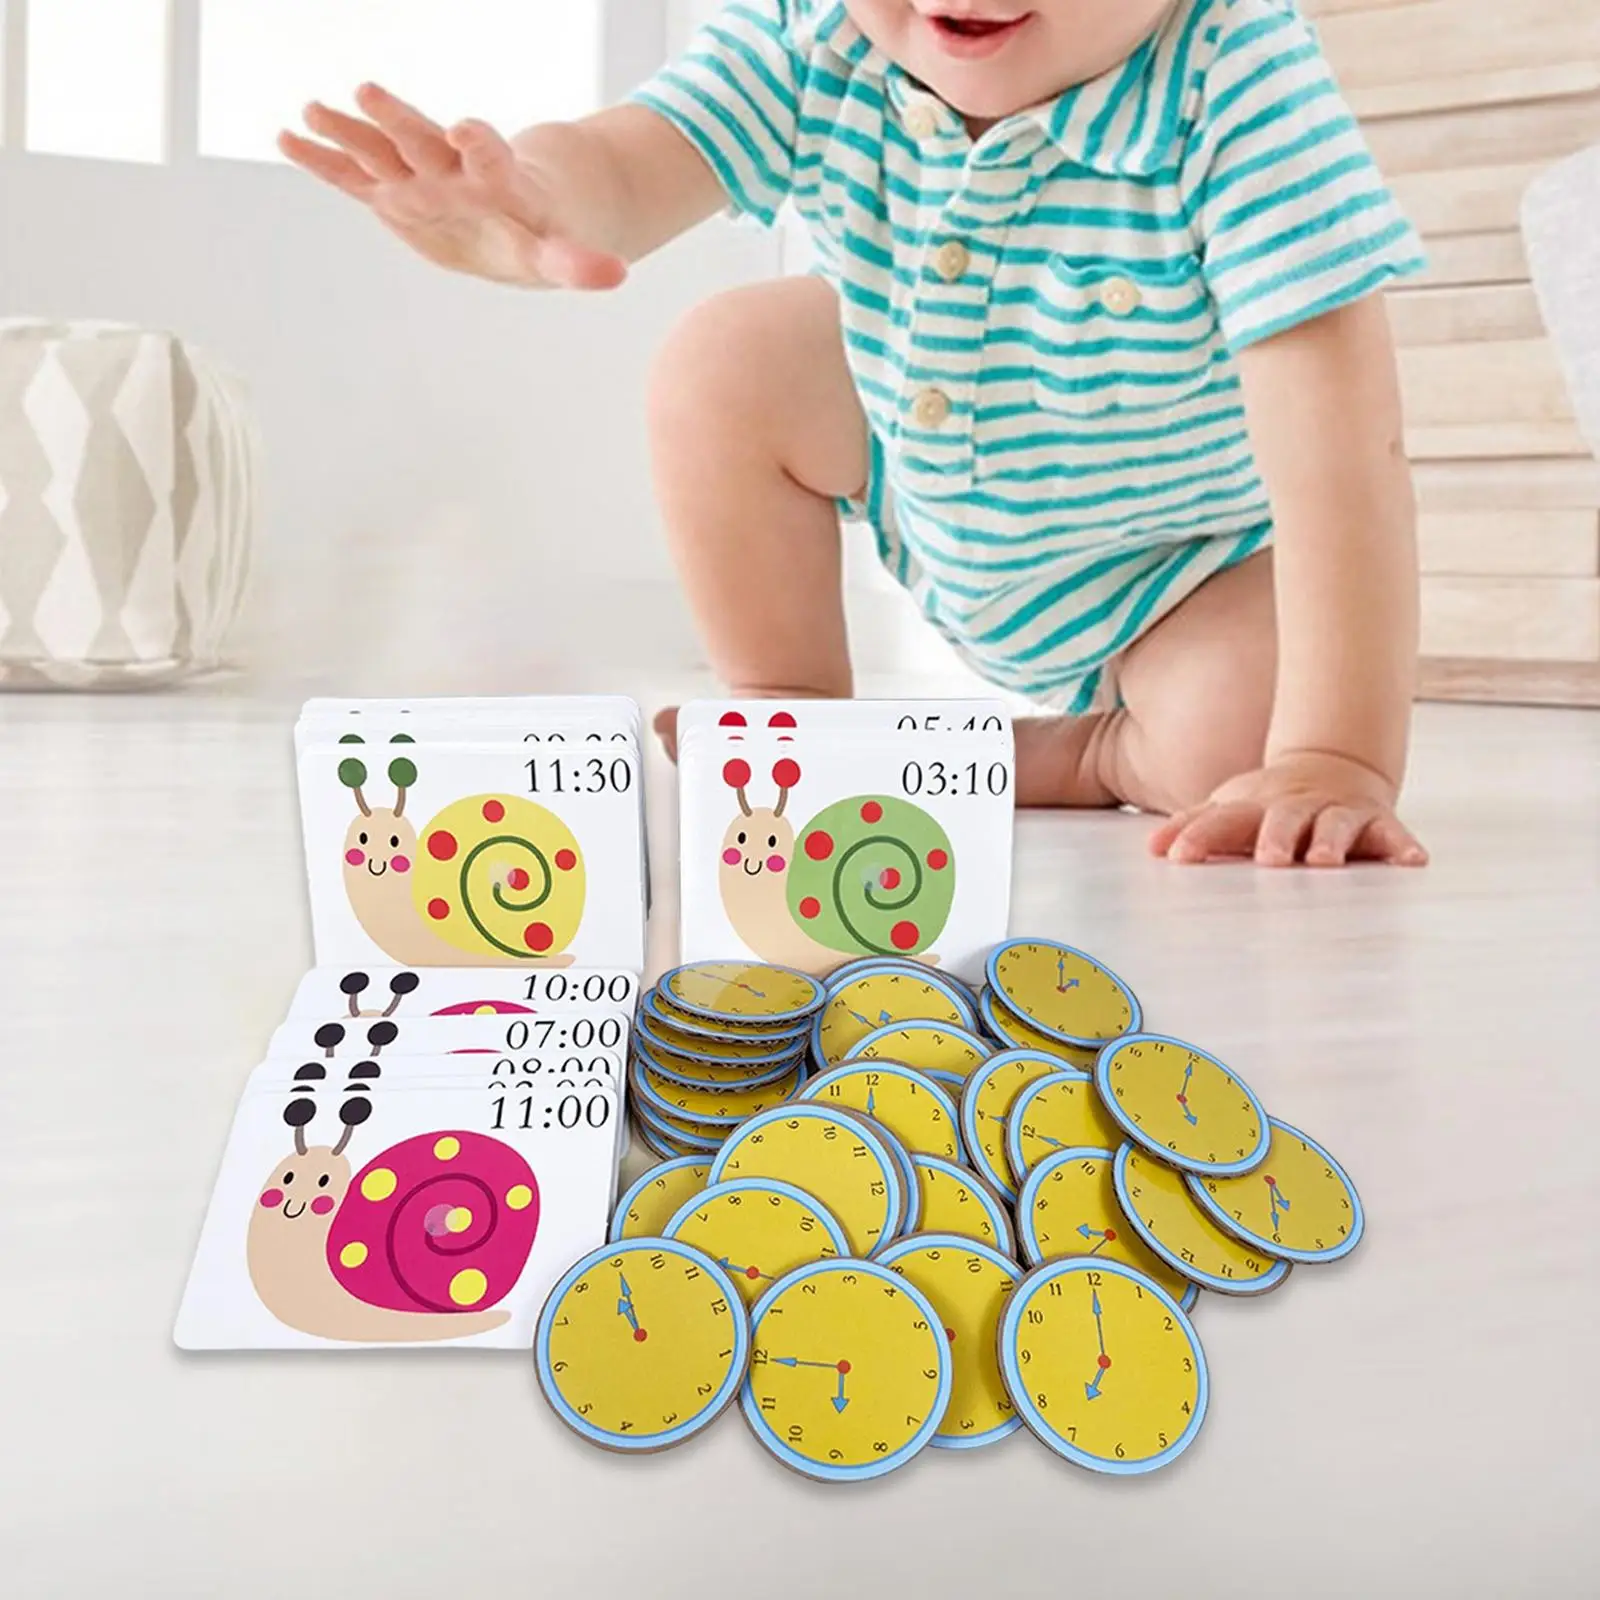 Montessori Teaching Clock Cards Time Learning Tools, Cognition Clocks Learning Hour Minute